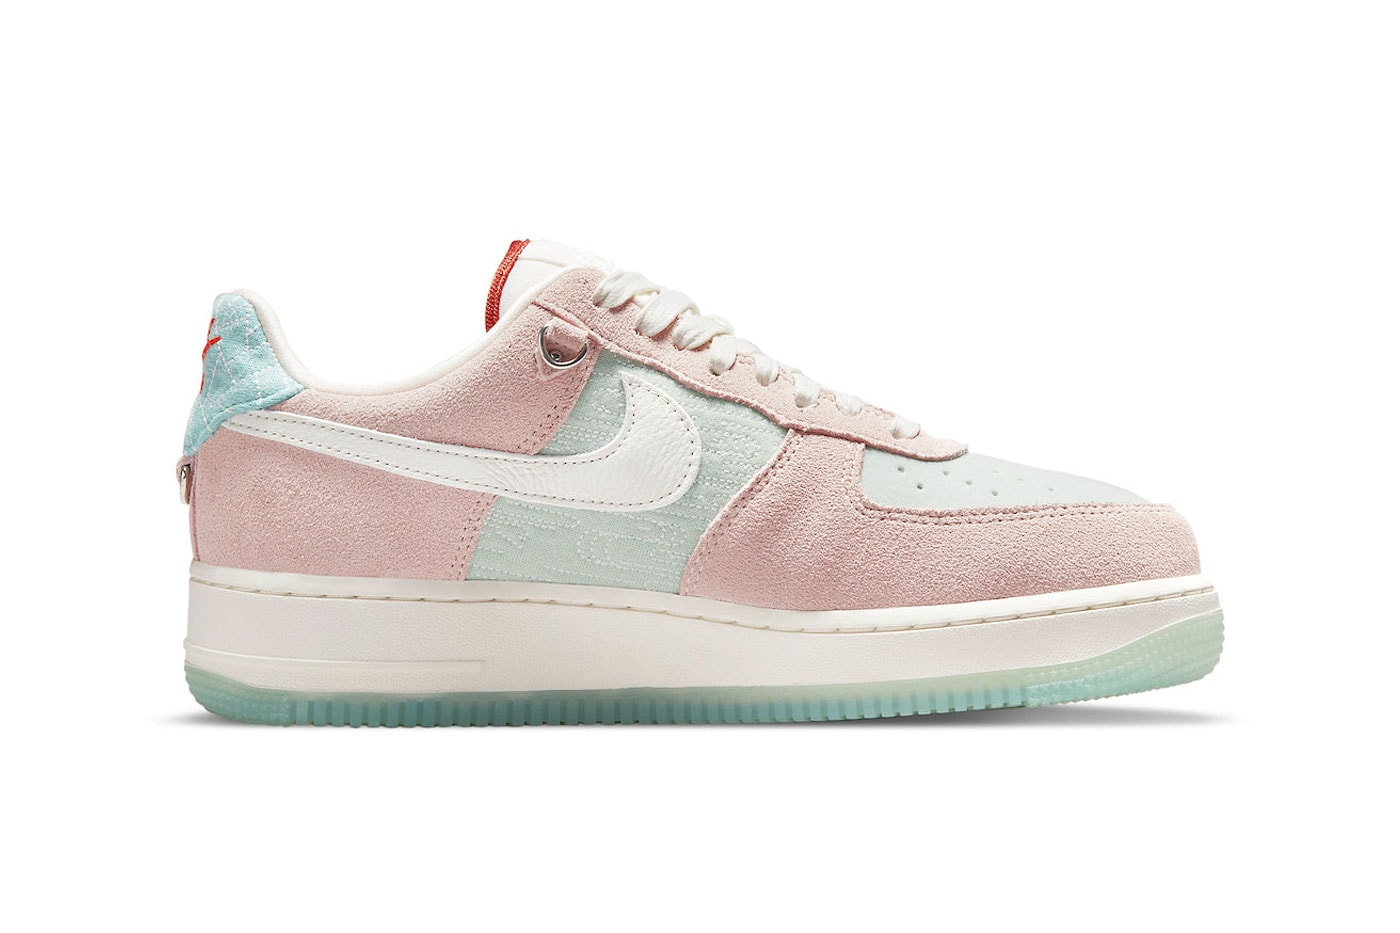 Nike Air Force 1 Low “Shapeless, Formless, Limitless” DQ5361-011 nike af1 40th anniversary pink suede green transluscent outsole 